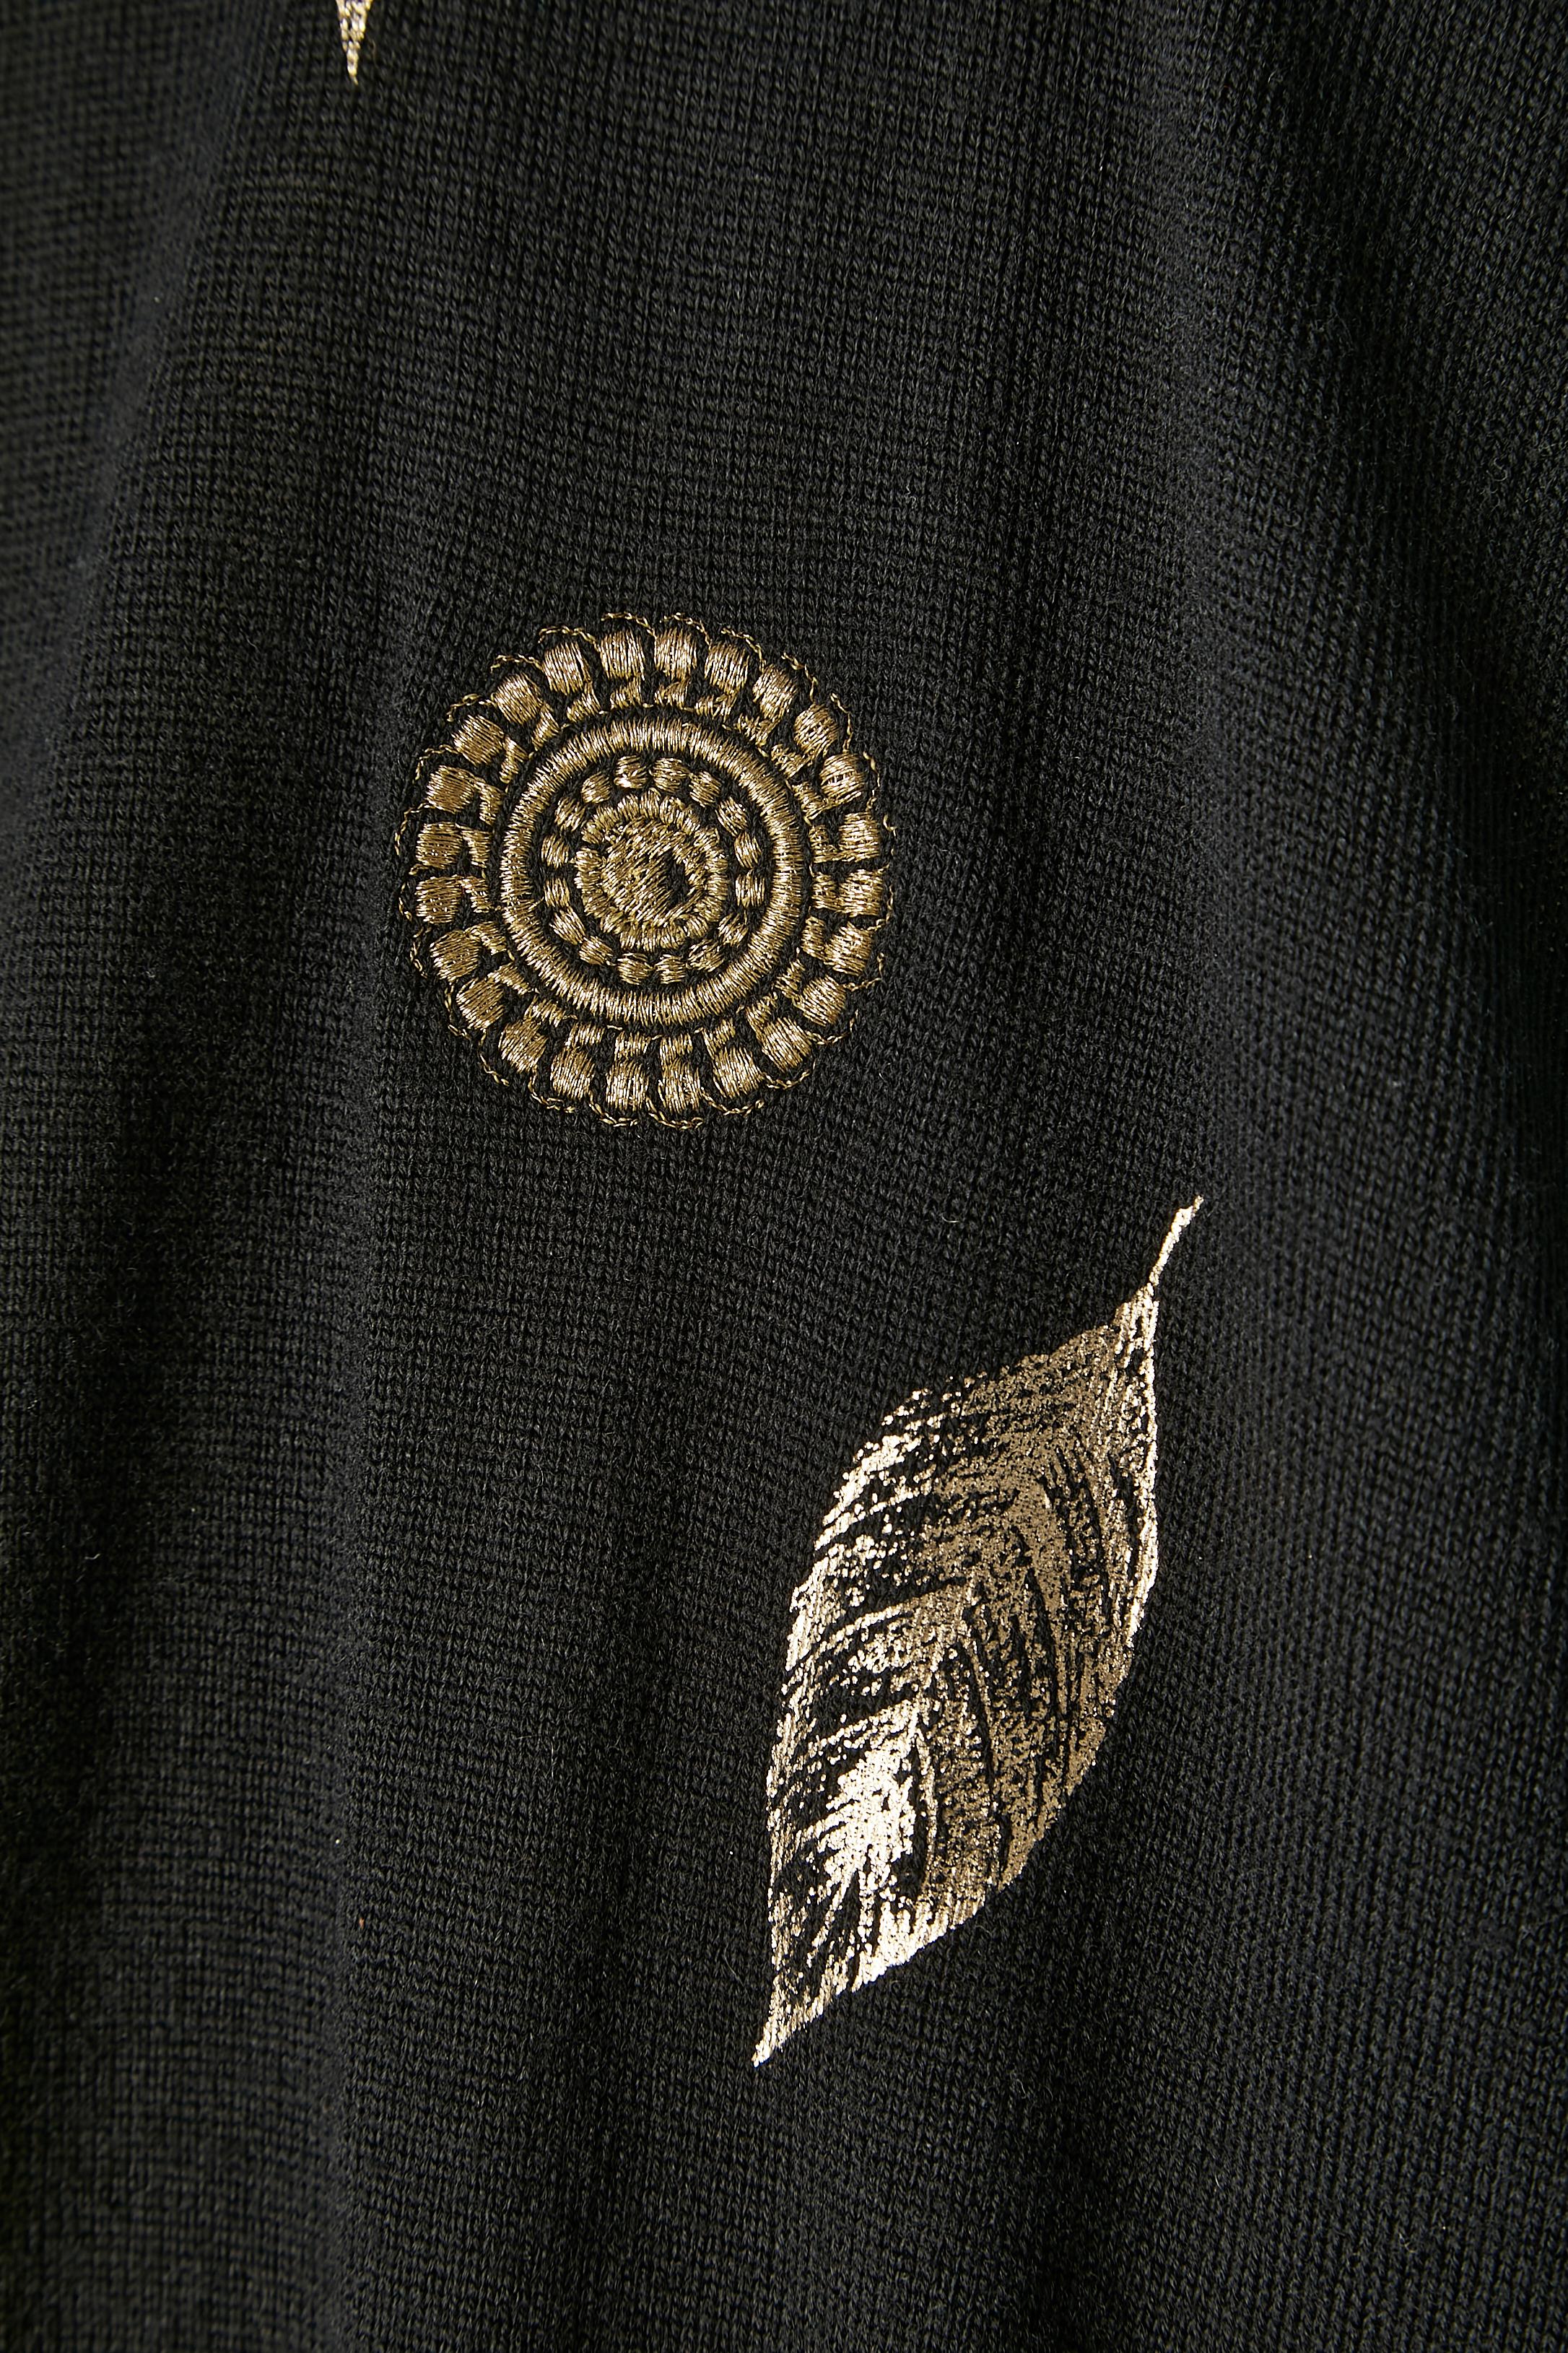 Black sweater with gold details embellishment and see-through back G. Ferré  For Sale 2